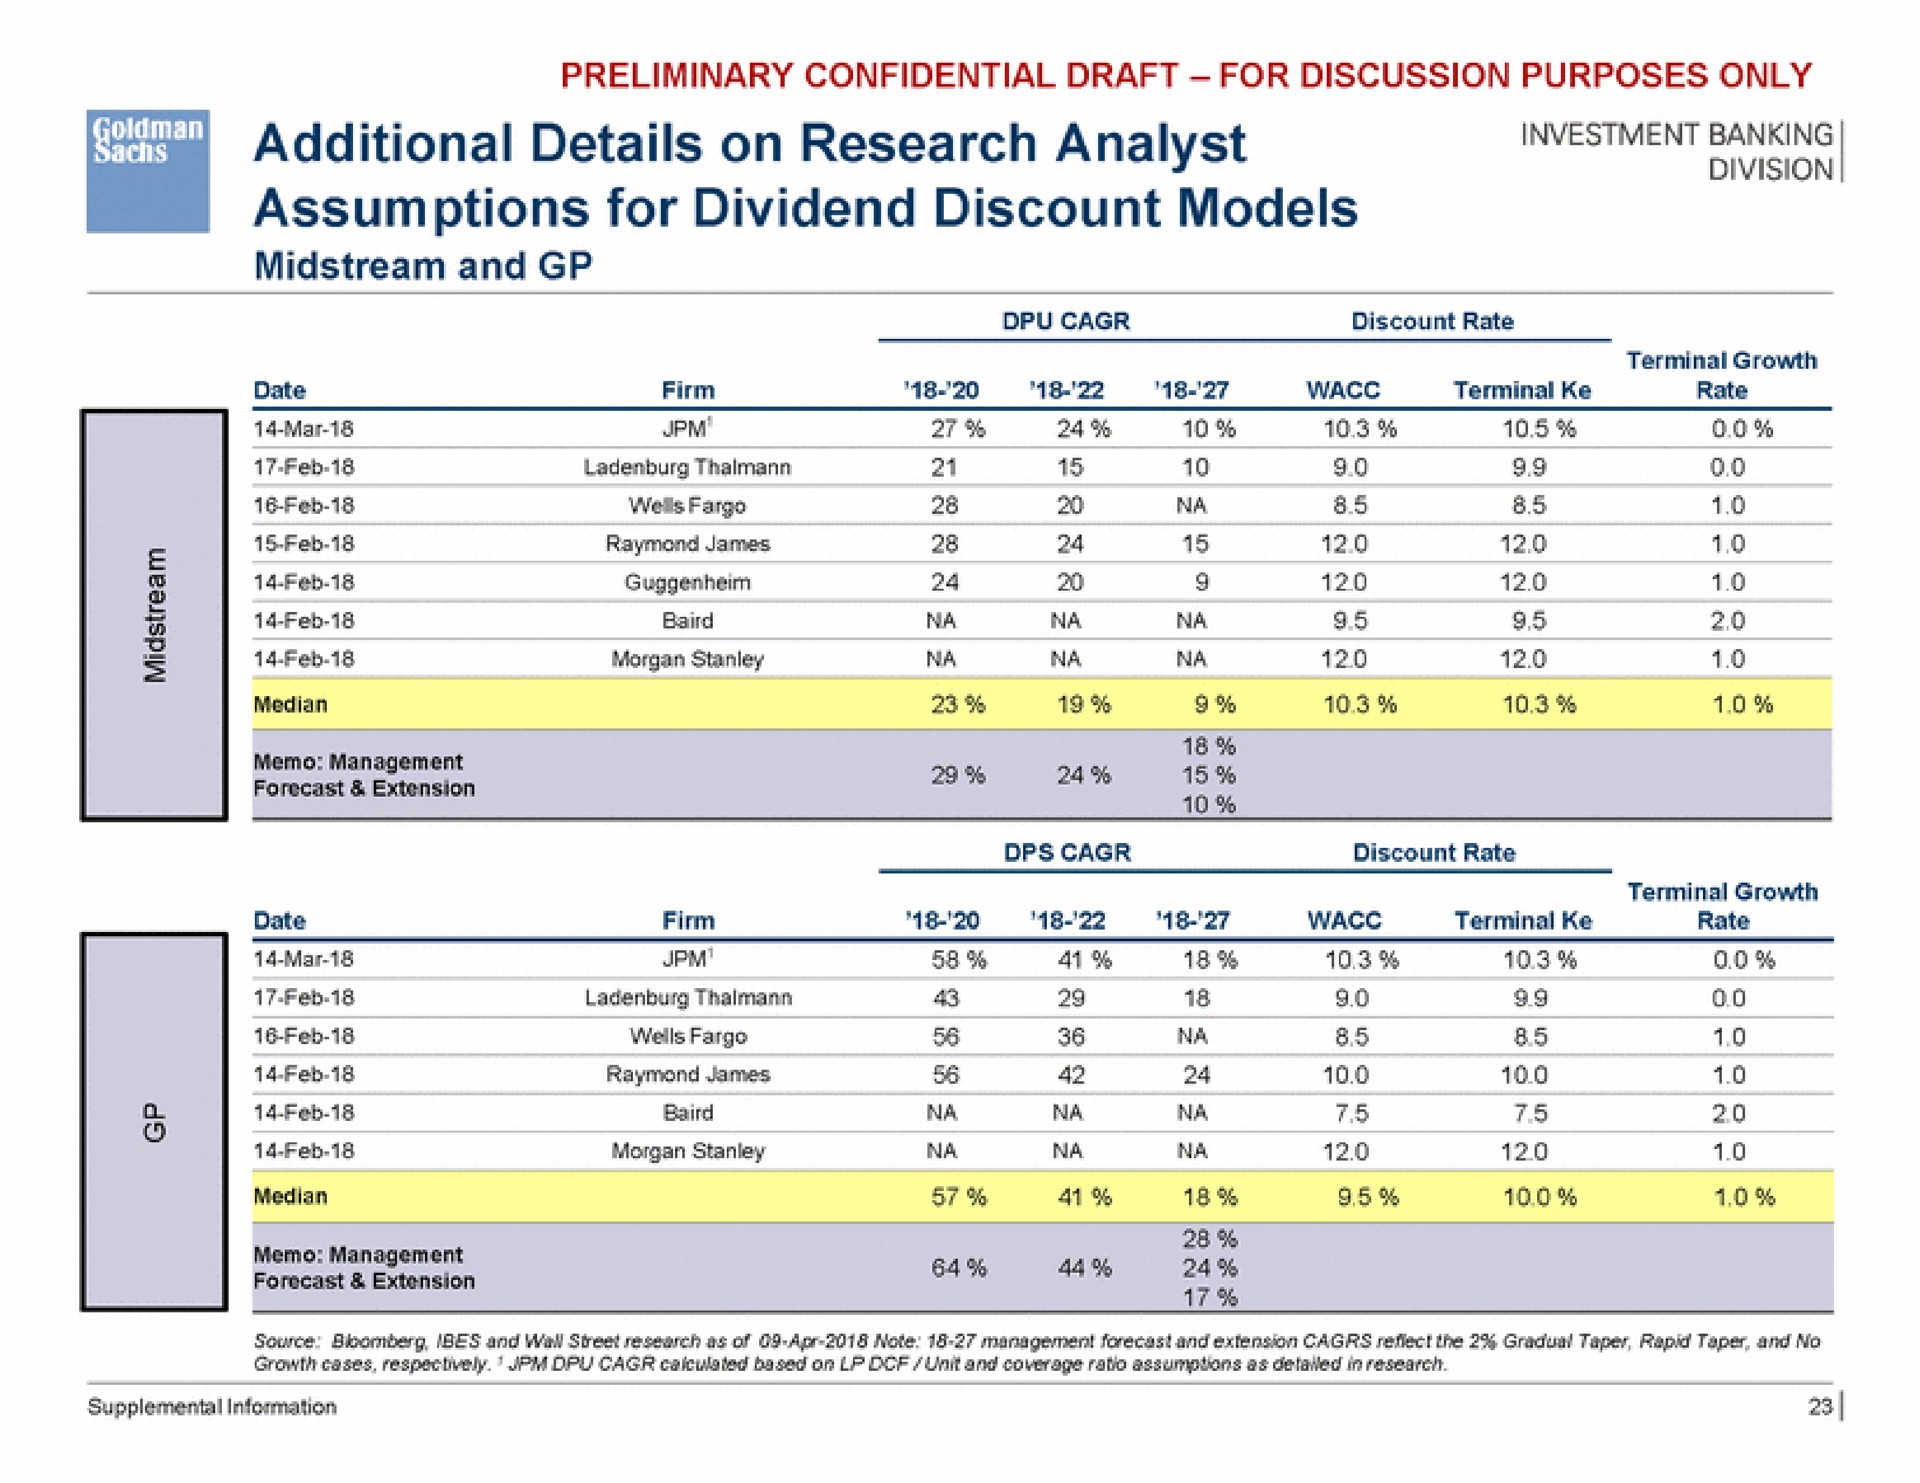 investment banking additional details on research analyst assumptions for dividend discount models forecast extension forecast extension | Goldman Sachs